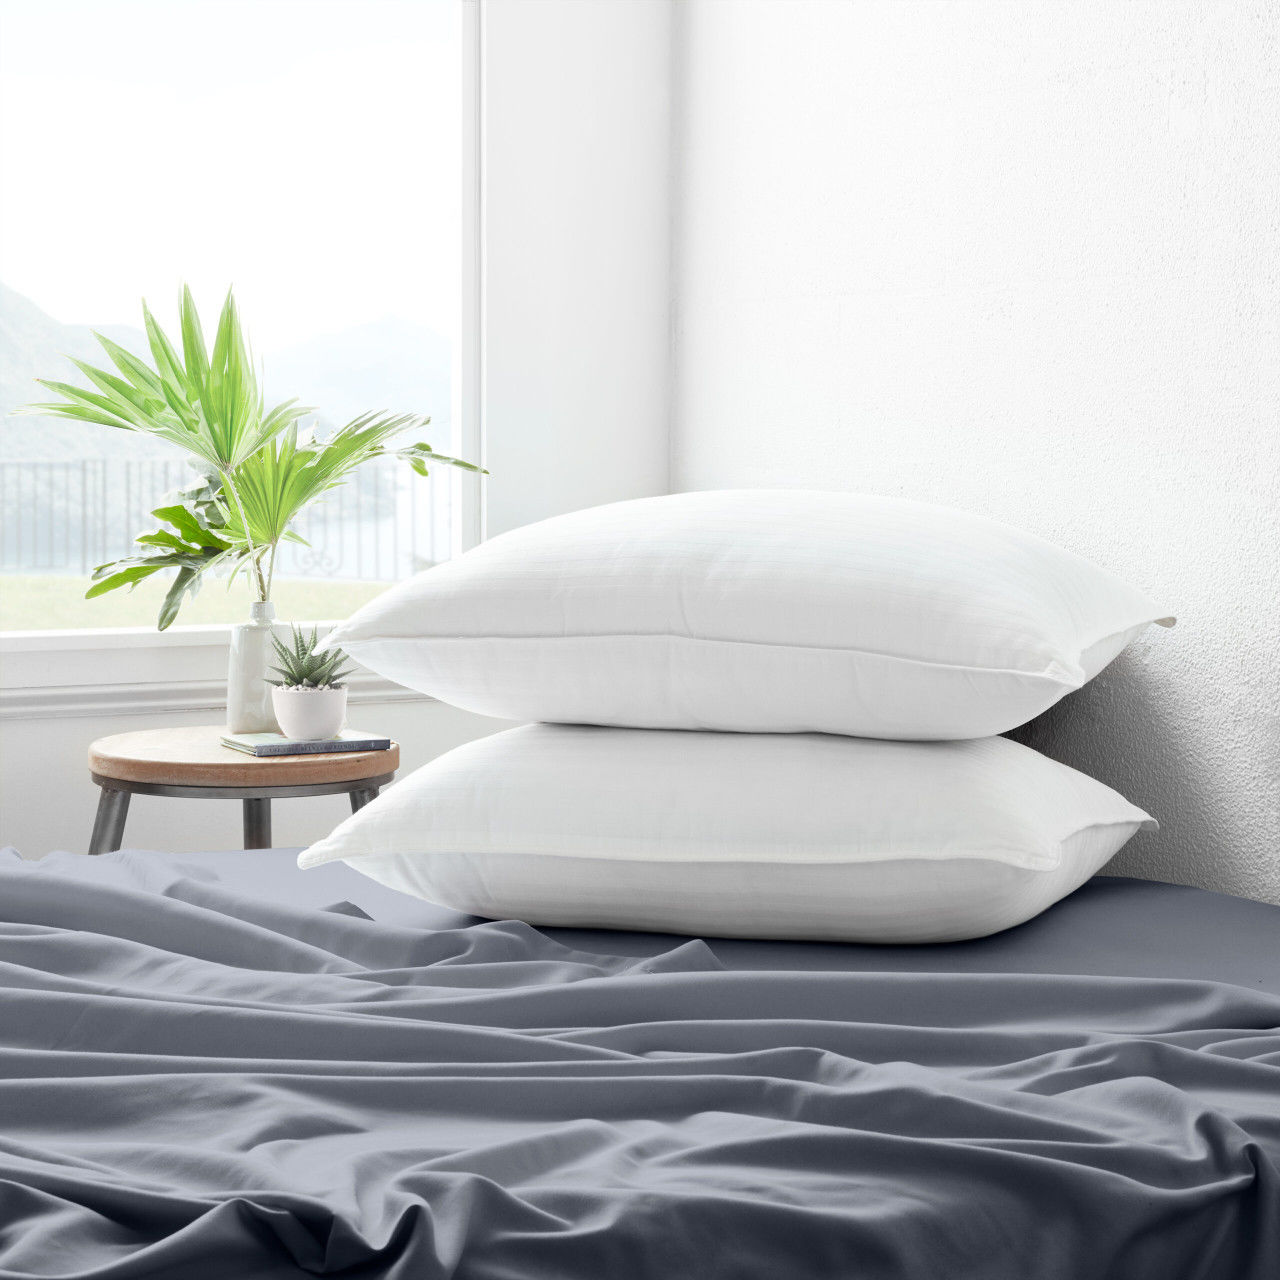 Does the plush down-alternative gel-fiber pillow resist fading and staining?